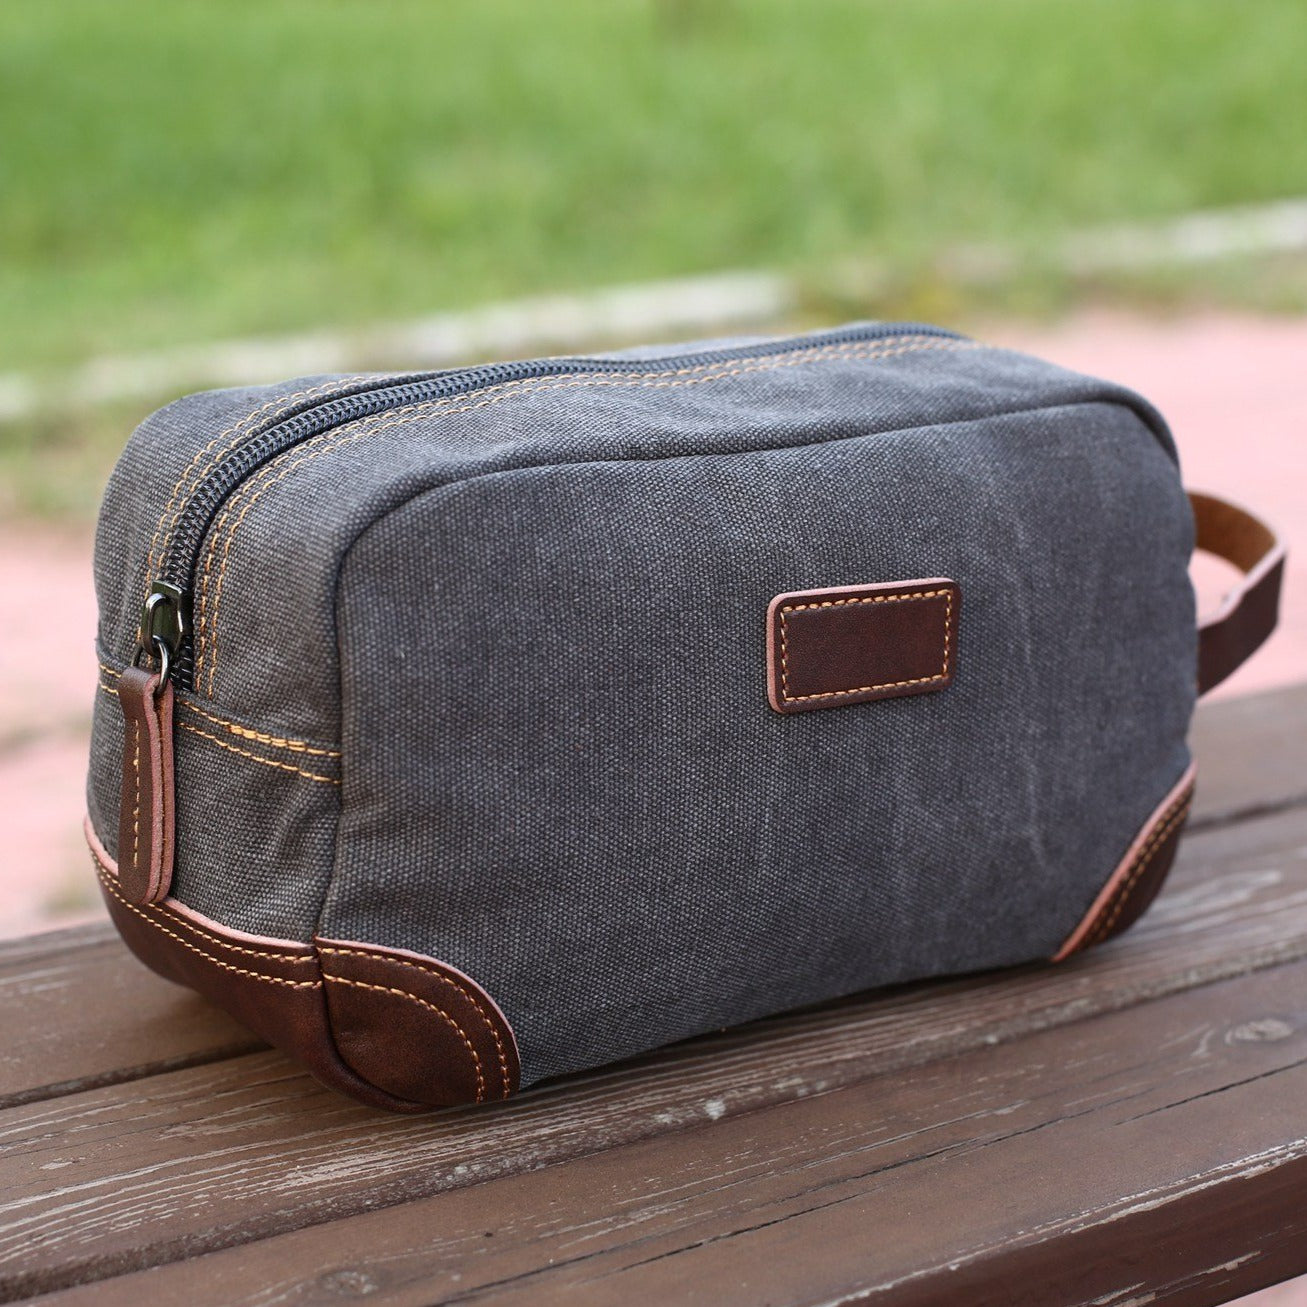 Personalized Groomsmen Gift, Leather Toiletry Bag Men, Leather